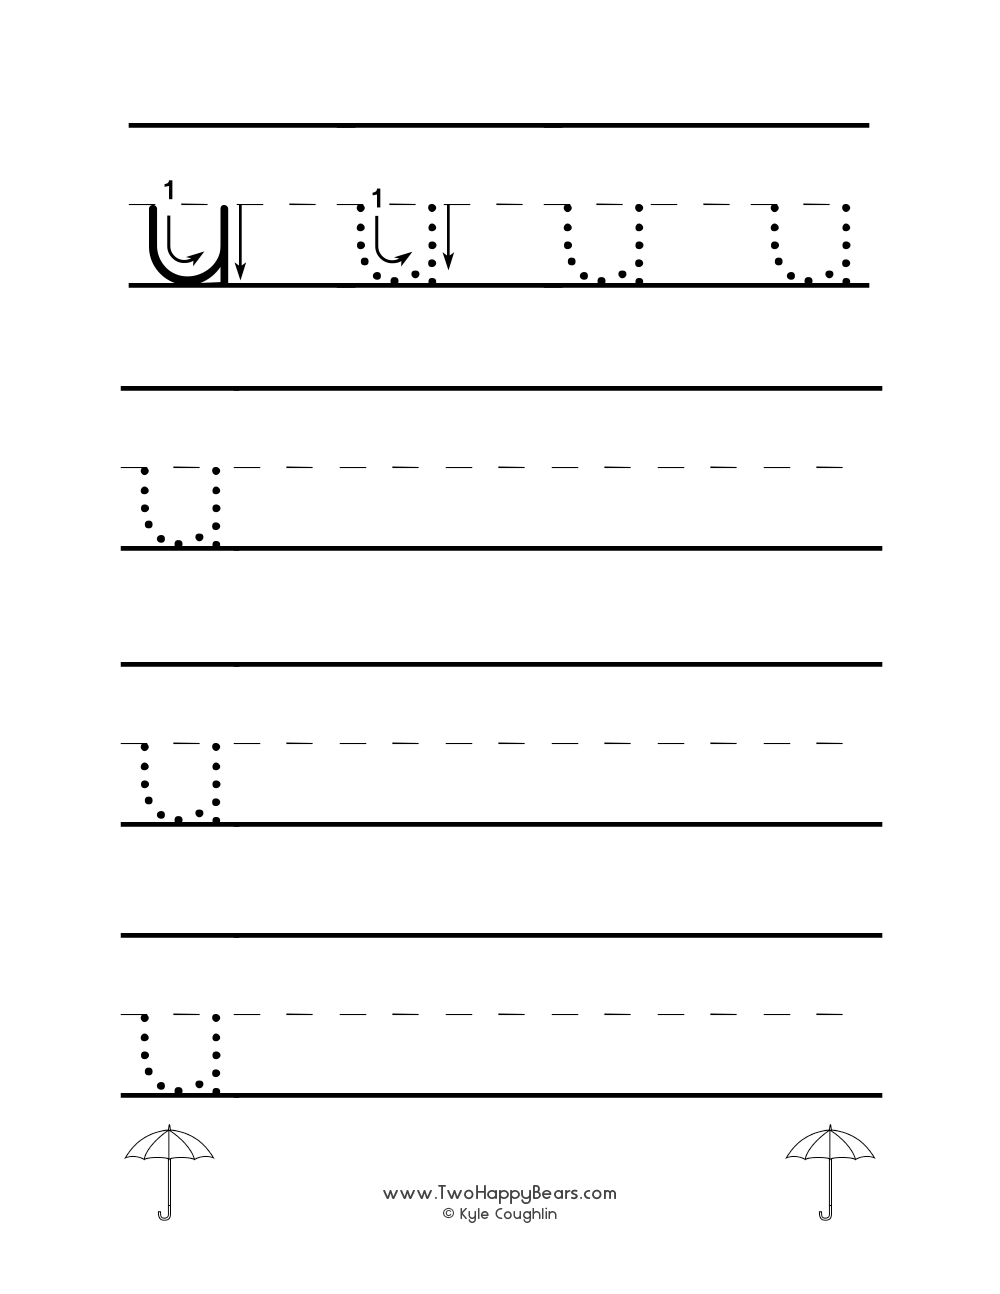 Worksheet for tracing and writing the lowercase letter U, in free printable PDF format.